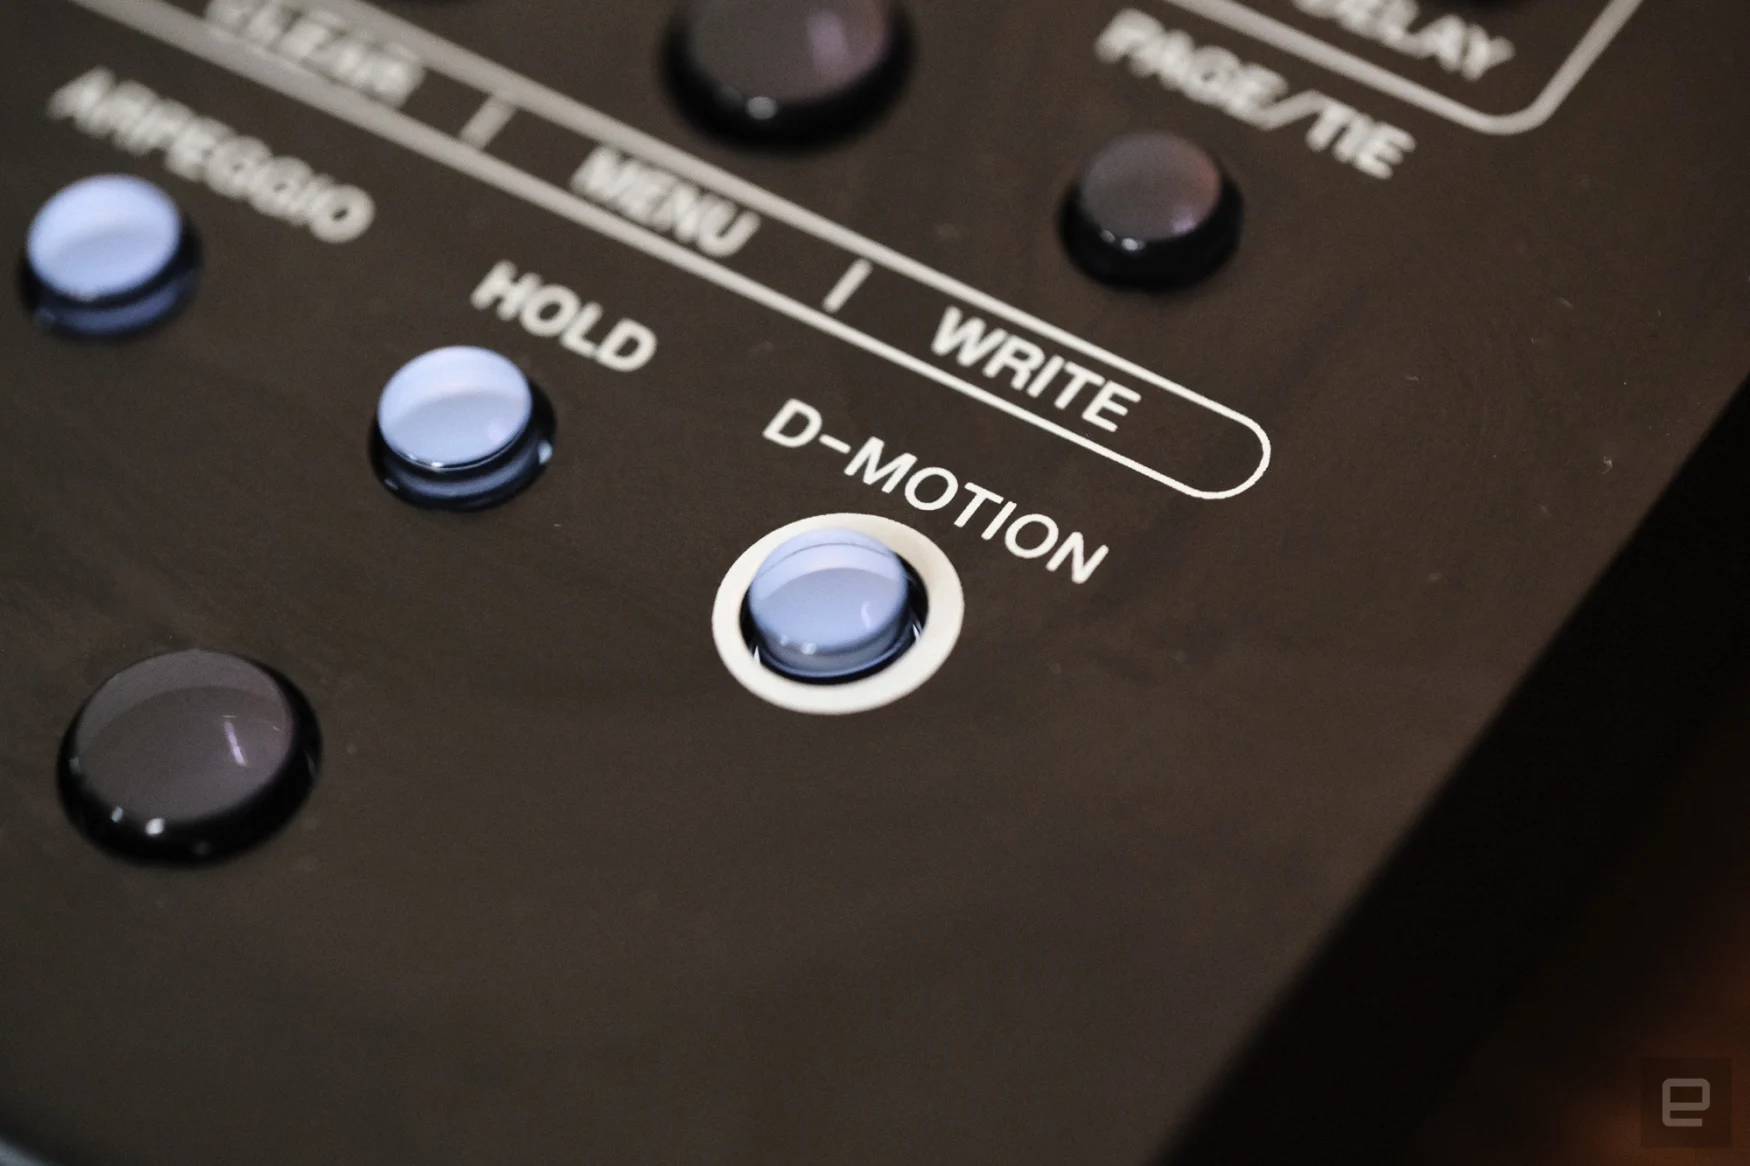 The D-Motion button on the RolSH-4d.